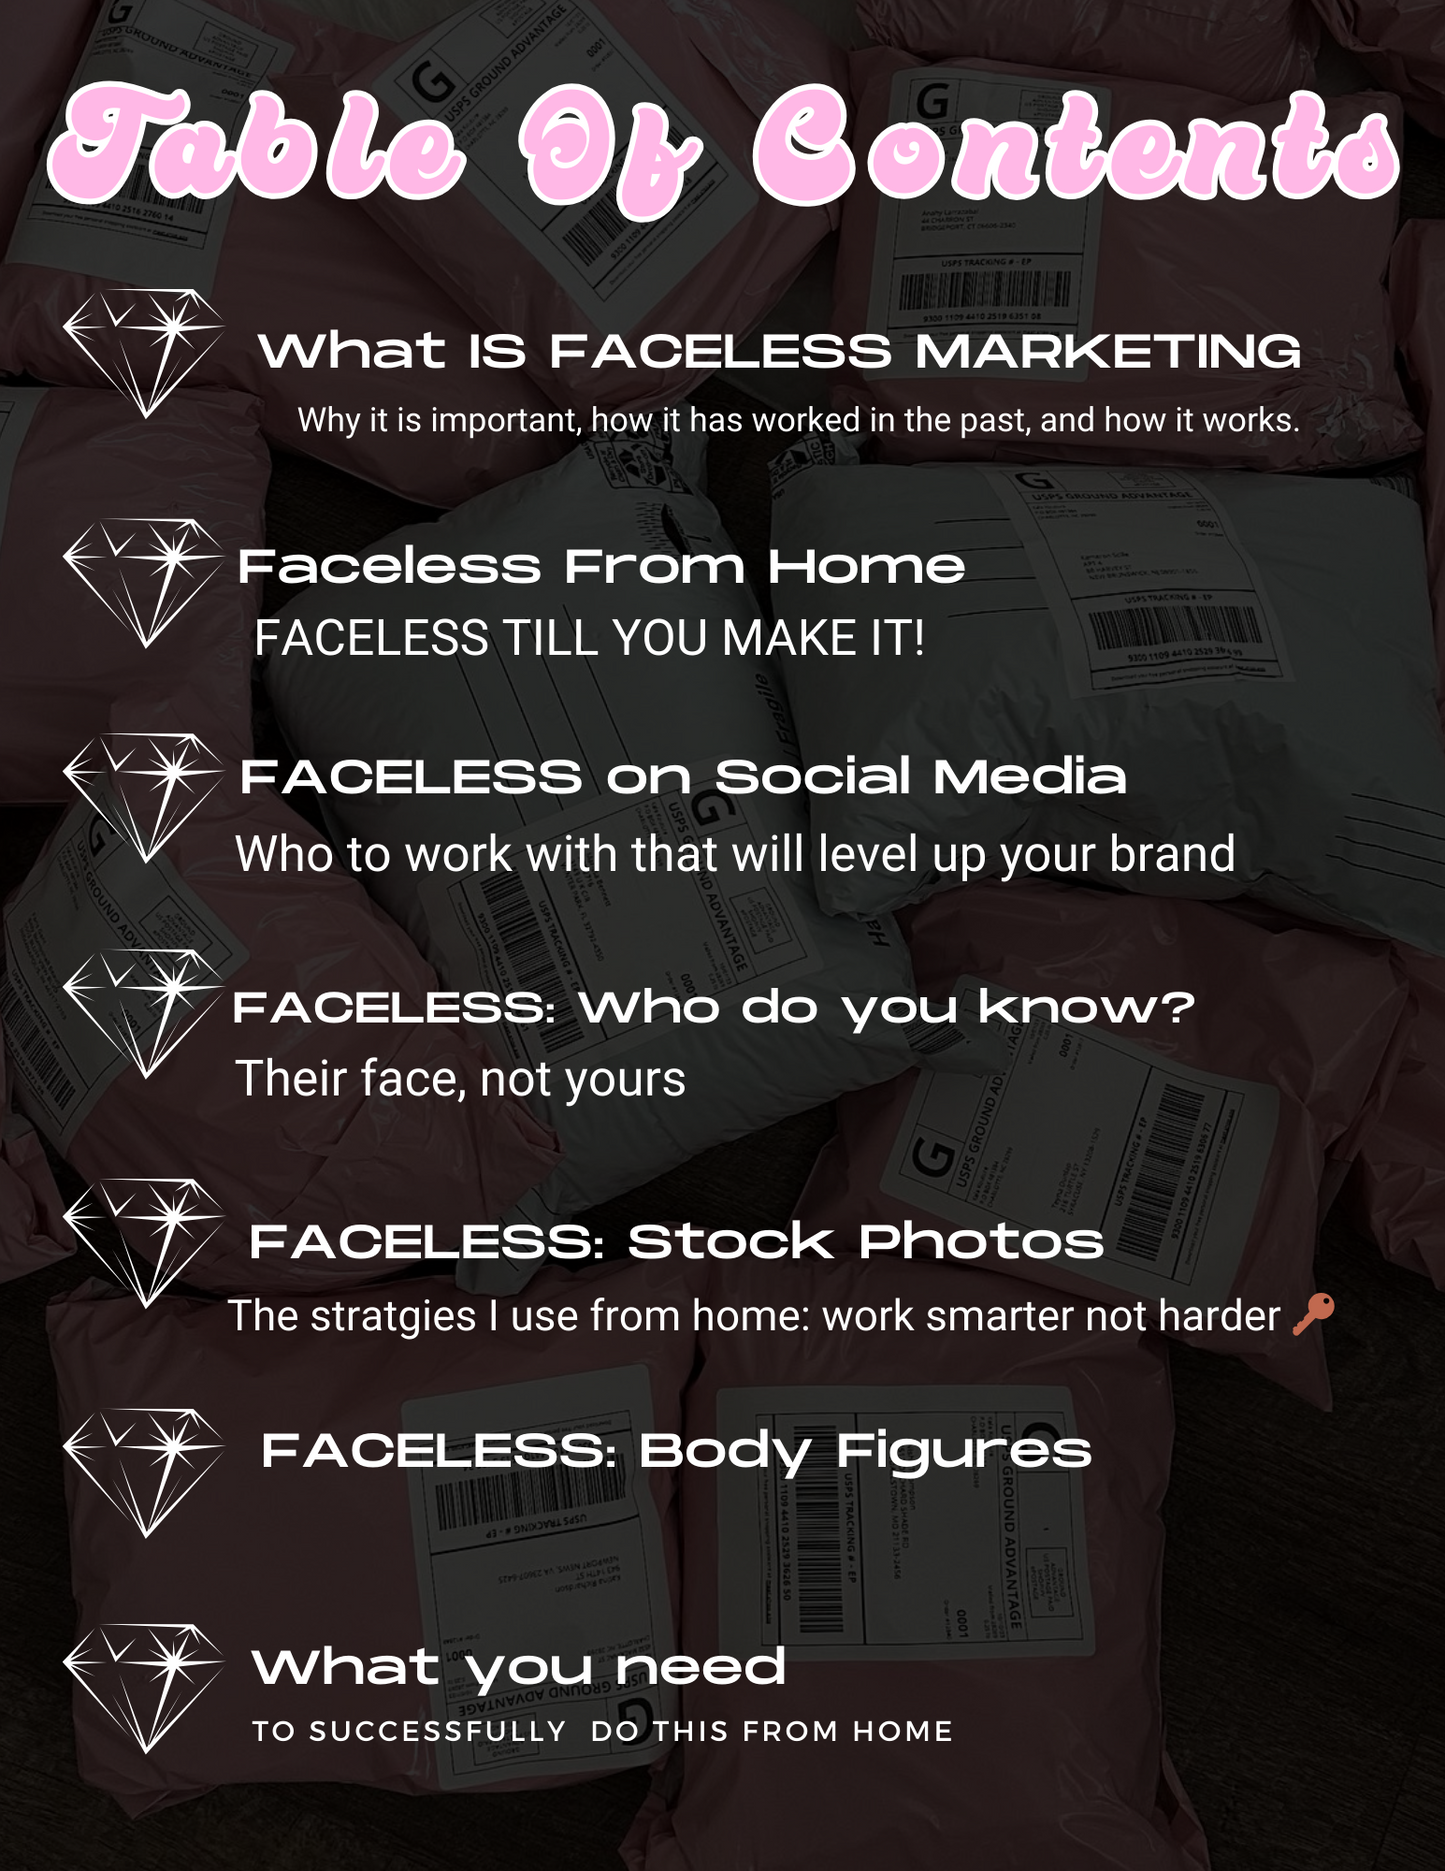 The 6 FIGURE BLUEPRINT TO FACELESS MARKETING: INFLUENCE, DIGITAL BRANDING, AND MORE!